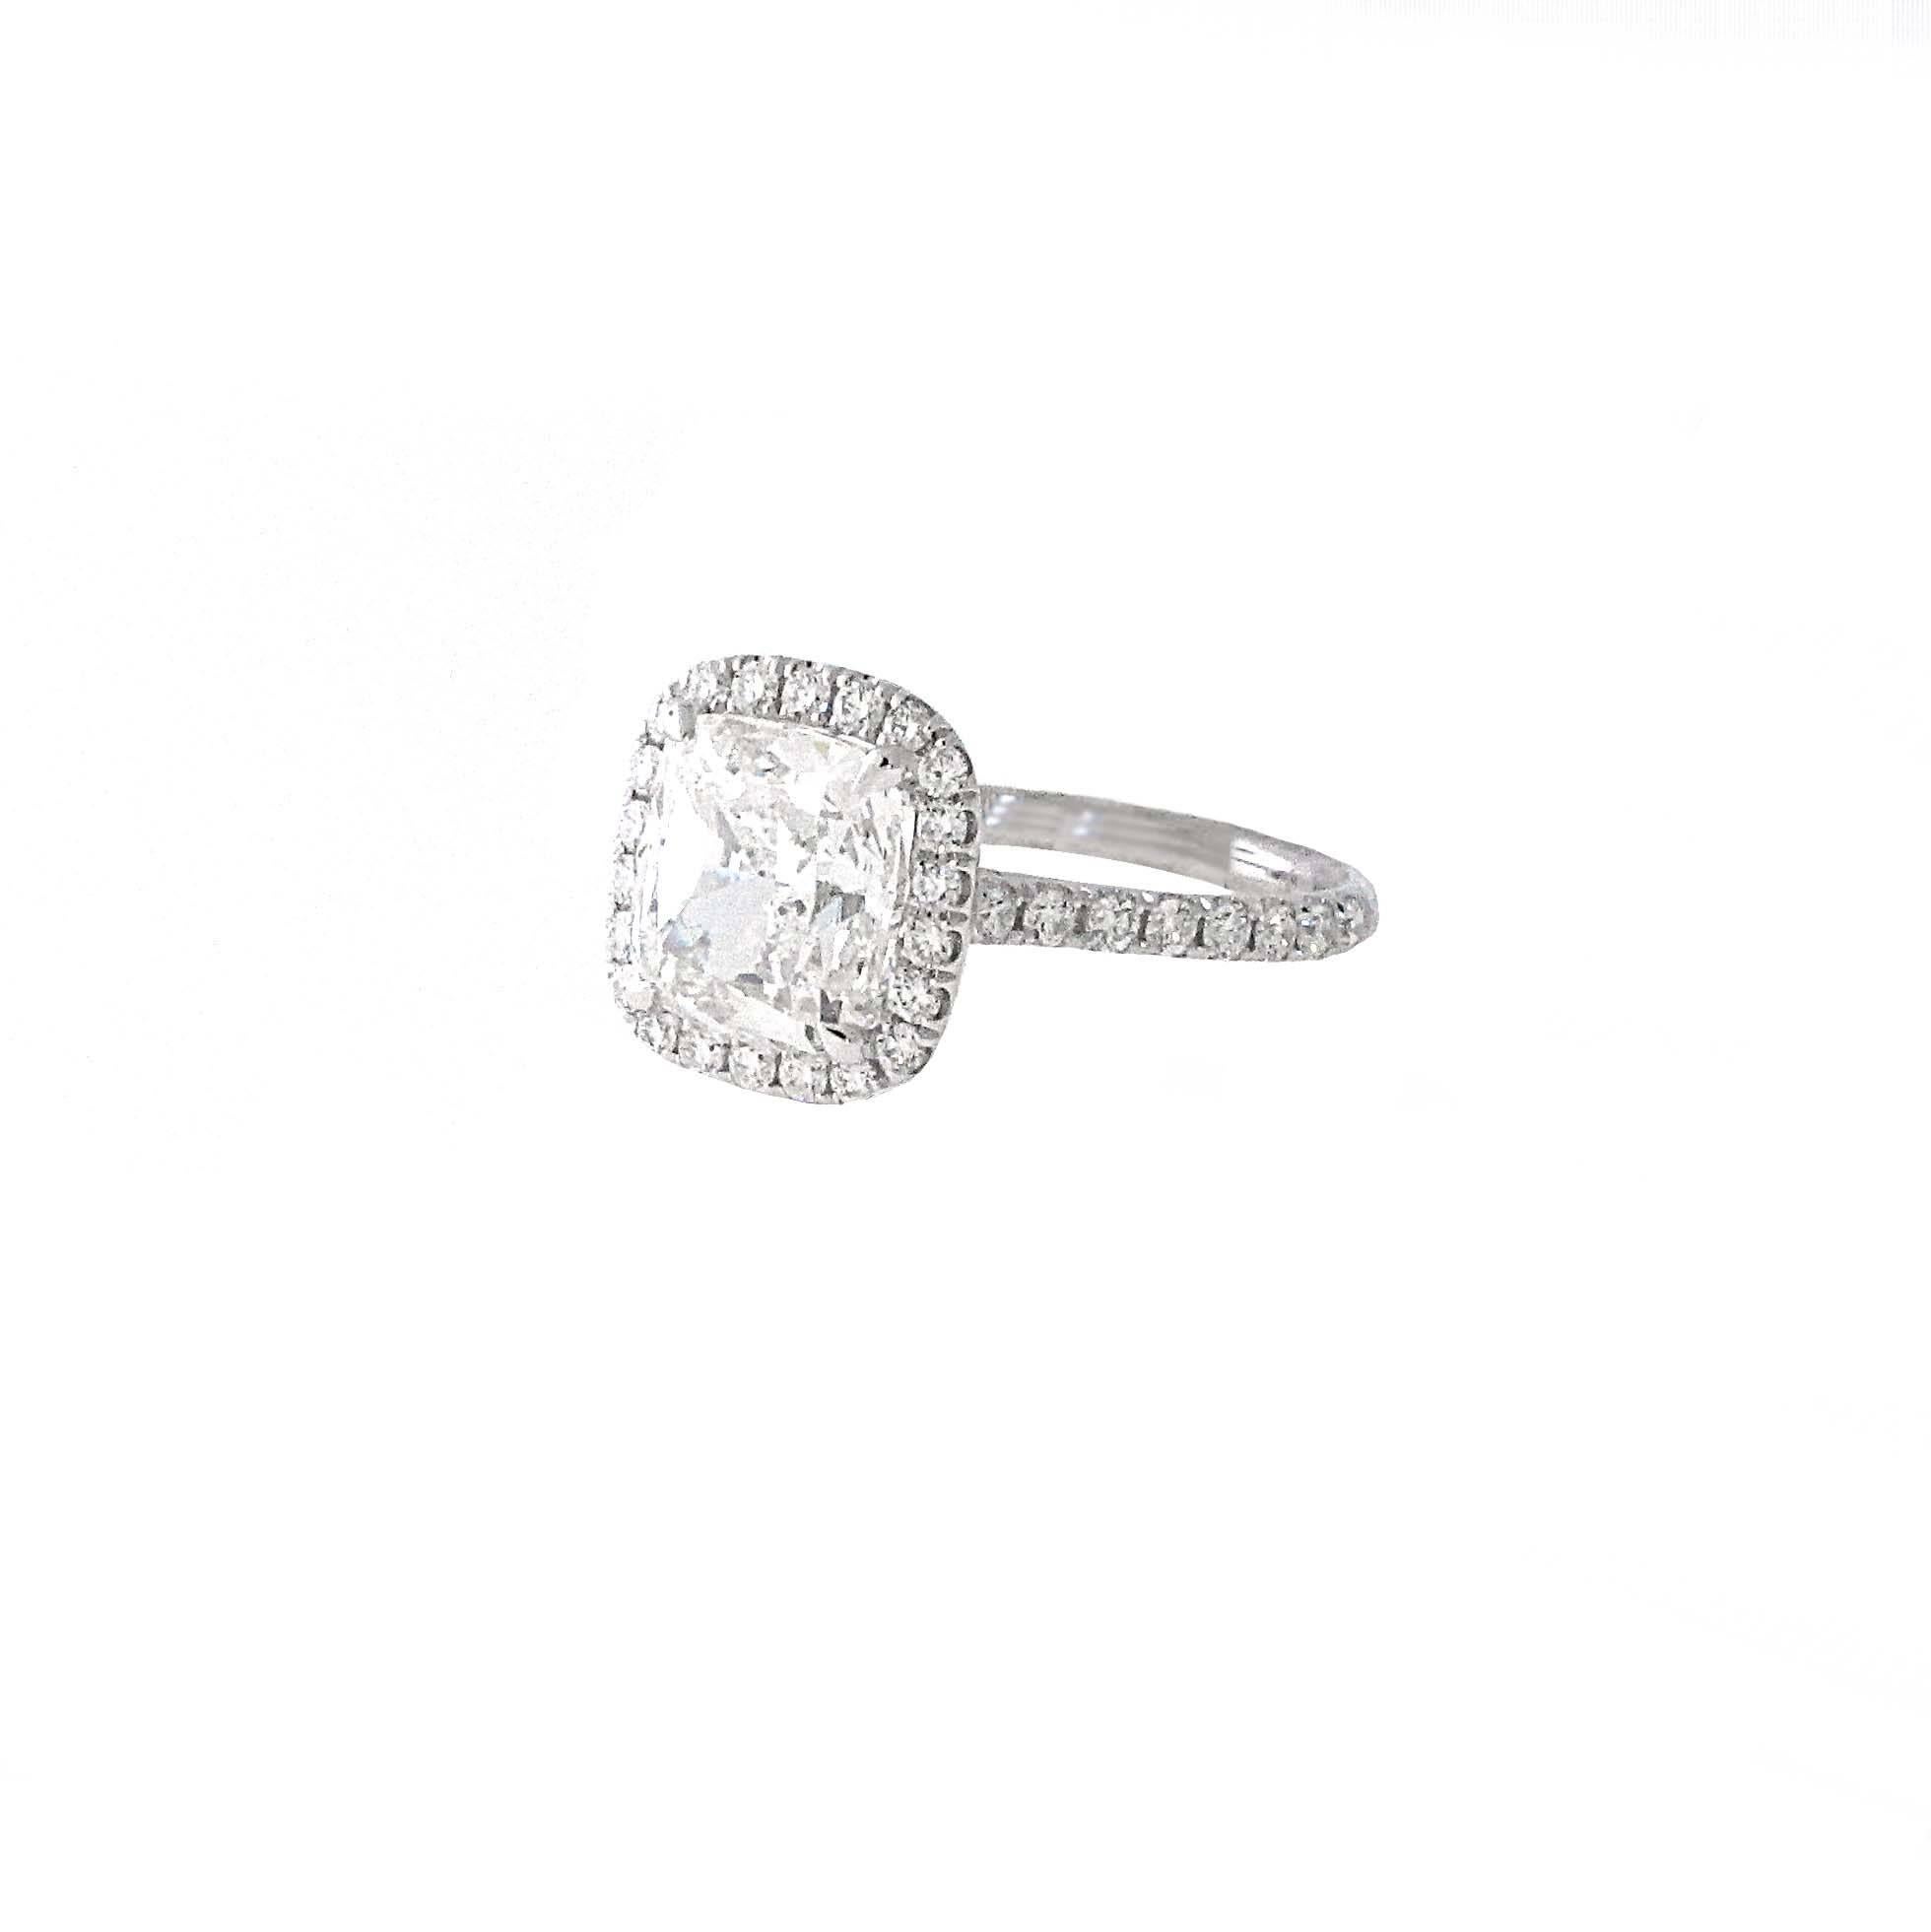 Hand made 3.01 GIA Certified Cushion Cut Diamond Engagement ring. This GIA Certified Cushion cut diamond is G color VVS1 Clarity
Ring is a size 6.  The mounting is platinum, not white gold, which makes it a higher quality ring. In the mounting there